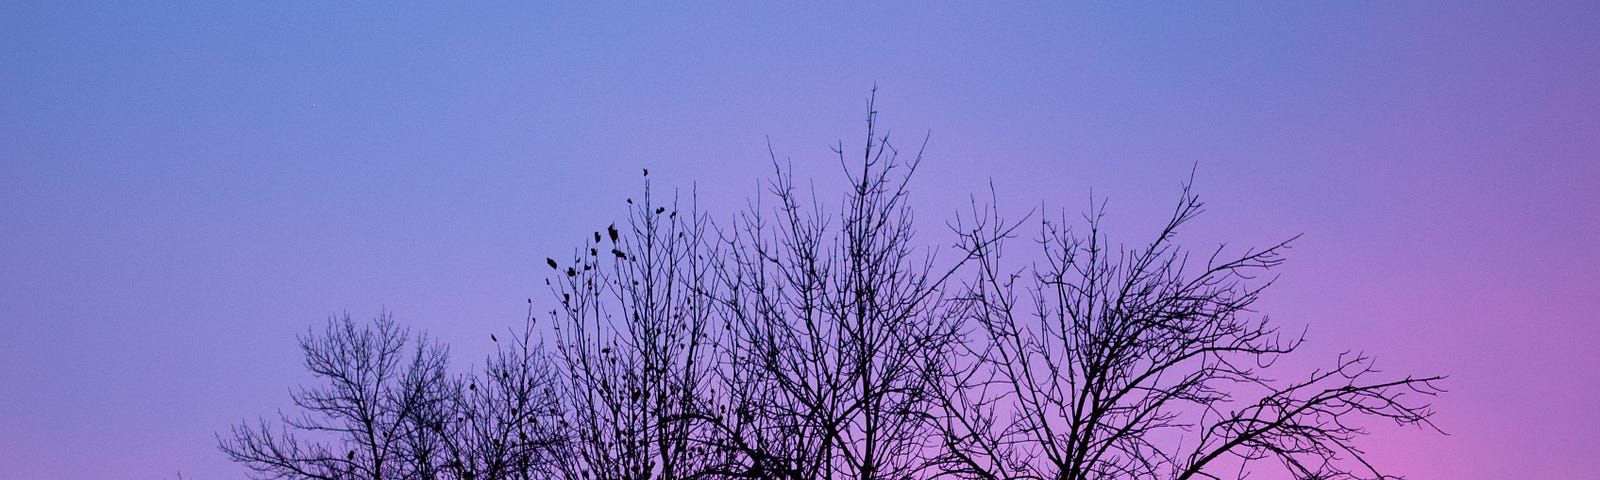 sunrise, a new day, bare winter branches | nature photography | © pockett dessert, new day